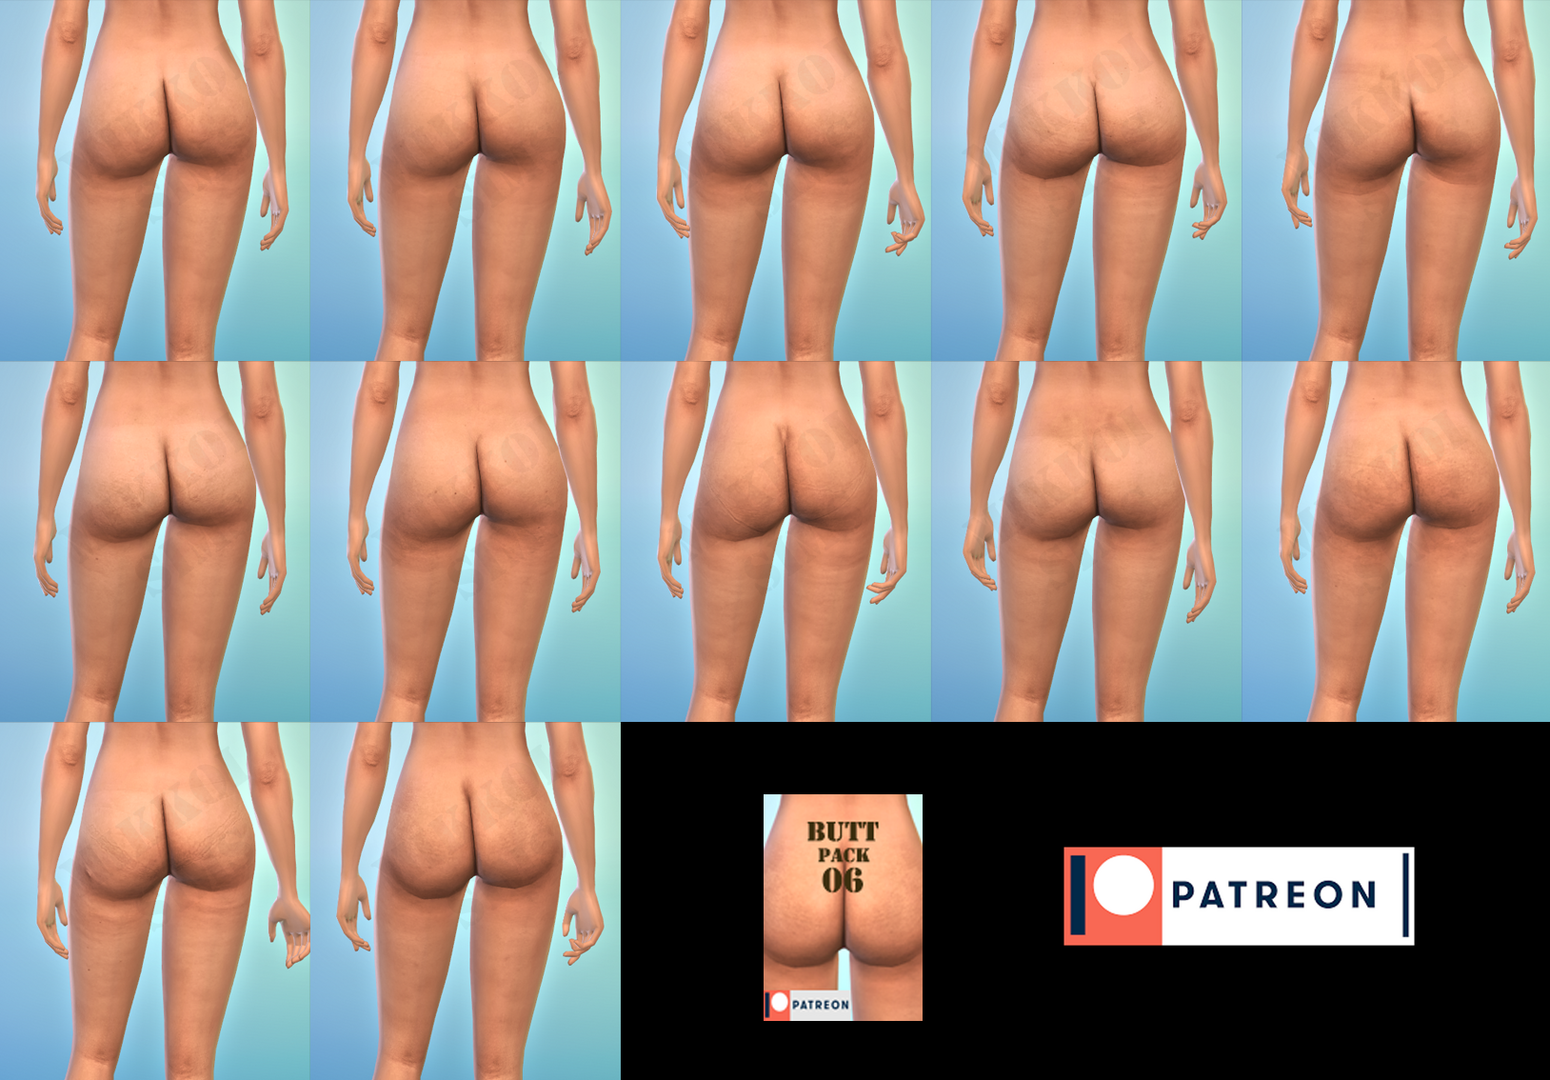 Realistic Female Body Details Downloads The Sims 4 Loverslab